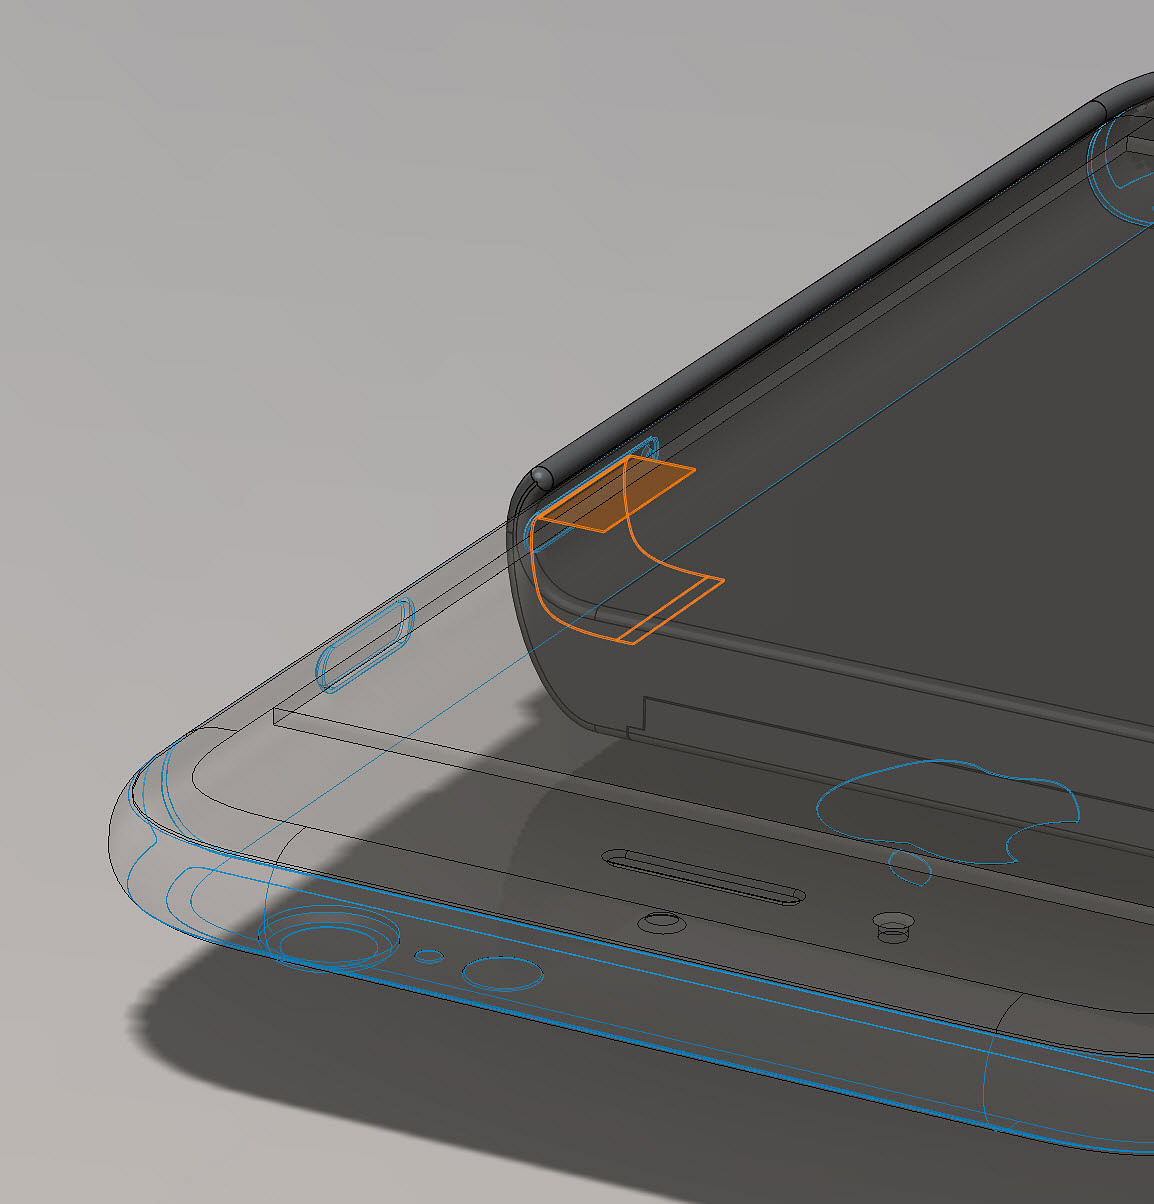 The standalone phone case will alert the user if their phone is being tapped. 